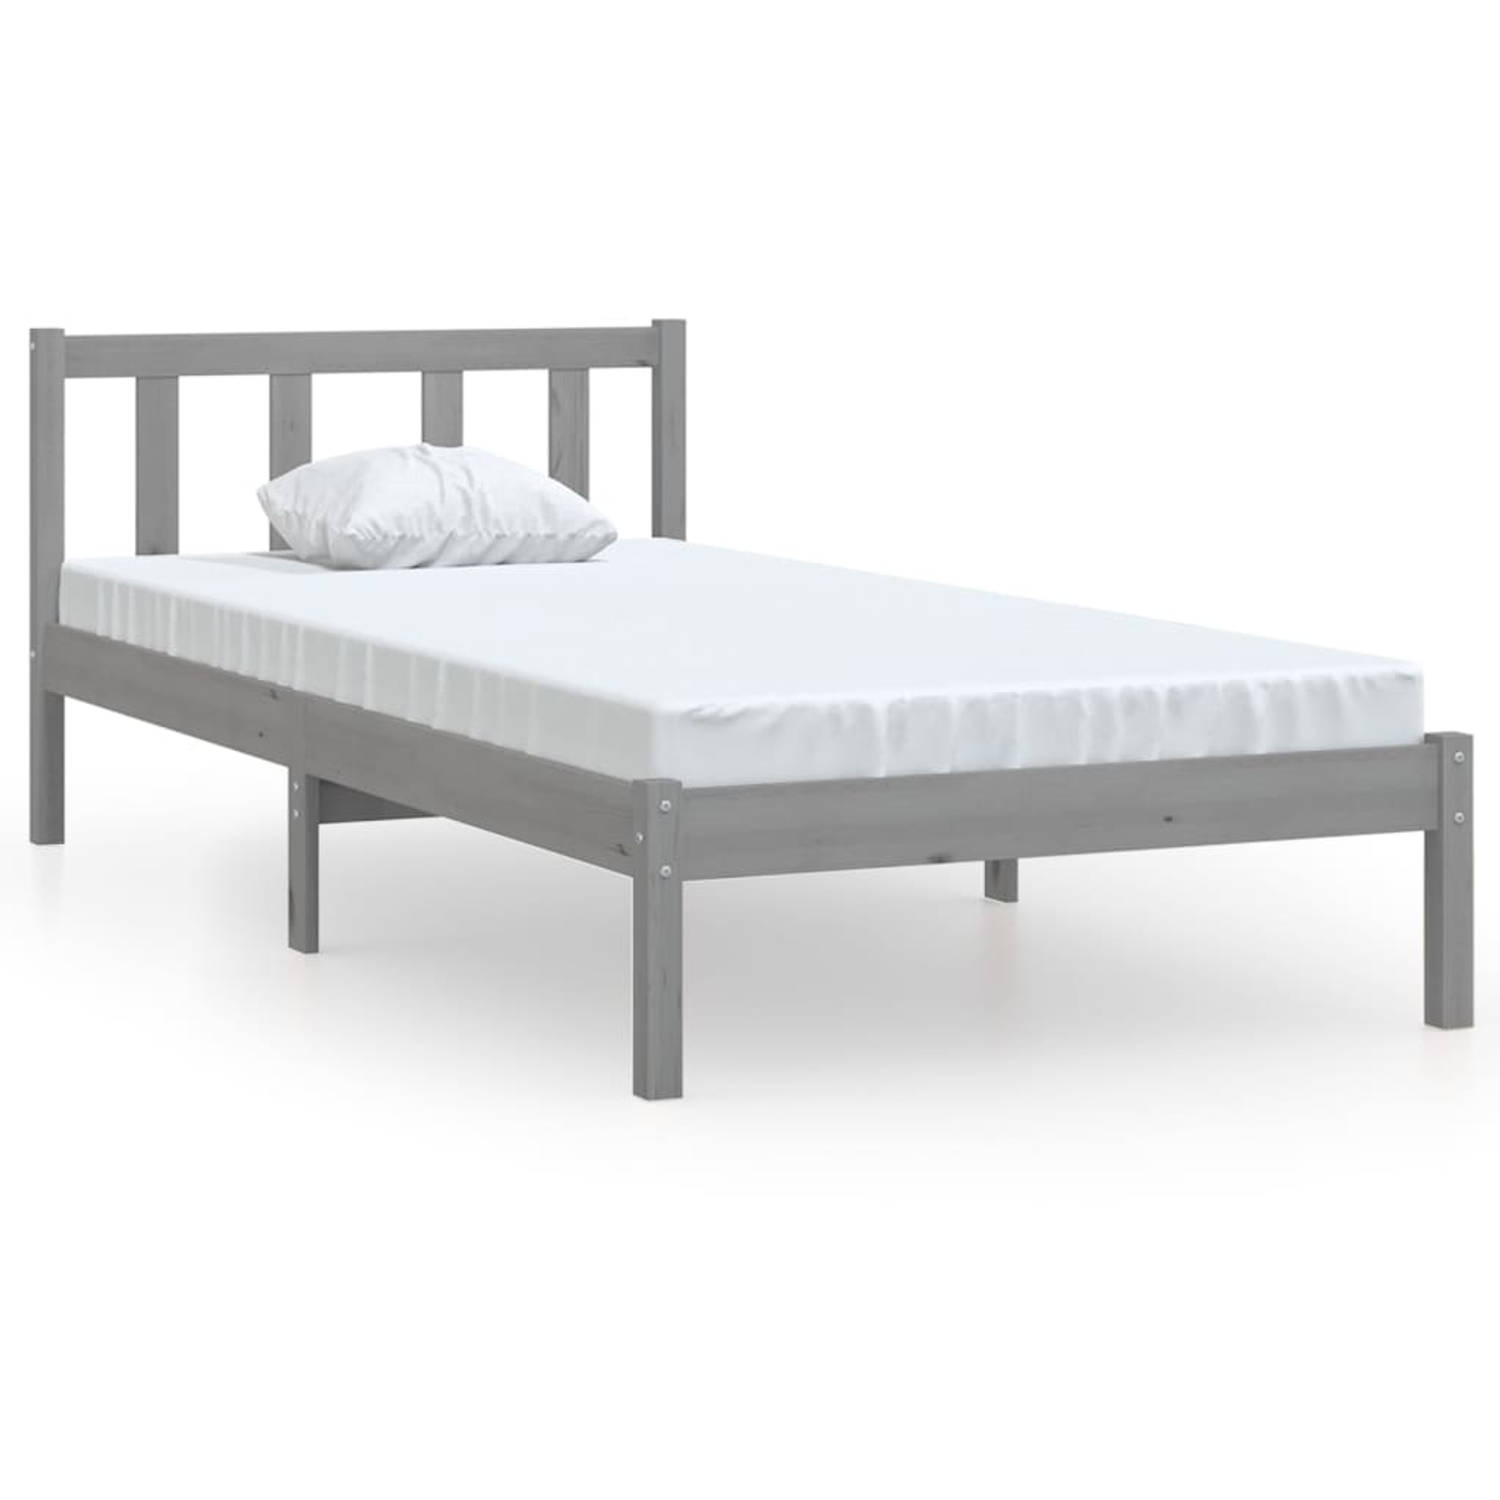 The Living Store Bedframe massief grenenhout grijs 90x200 cm - Bedframe - Bedframe - Bed Frame - Bed Frames - Bed - Bedden - 1-persoonsbed - 1-persoonsbedden - Eenpersoons Bed